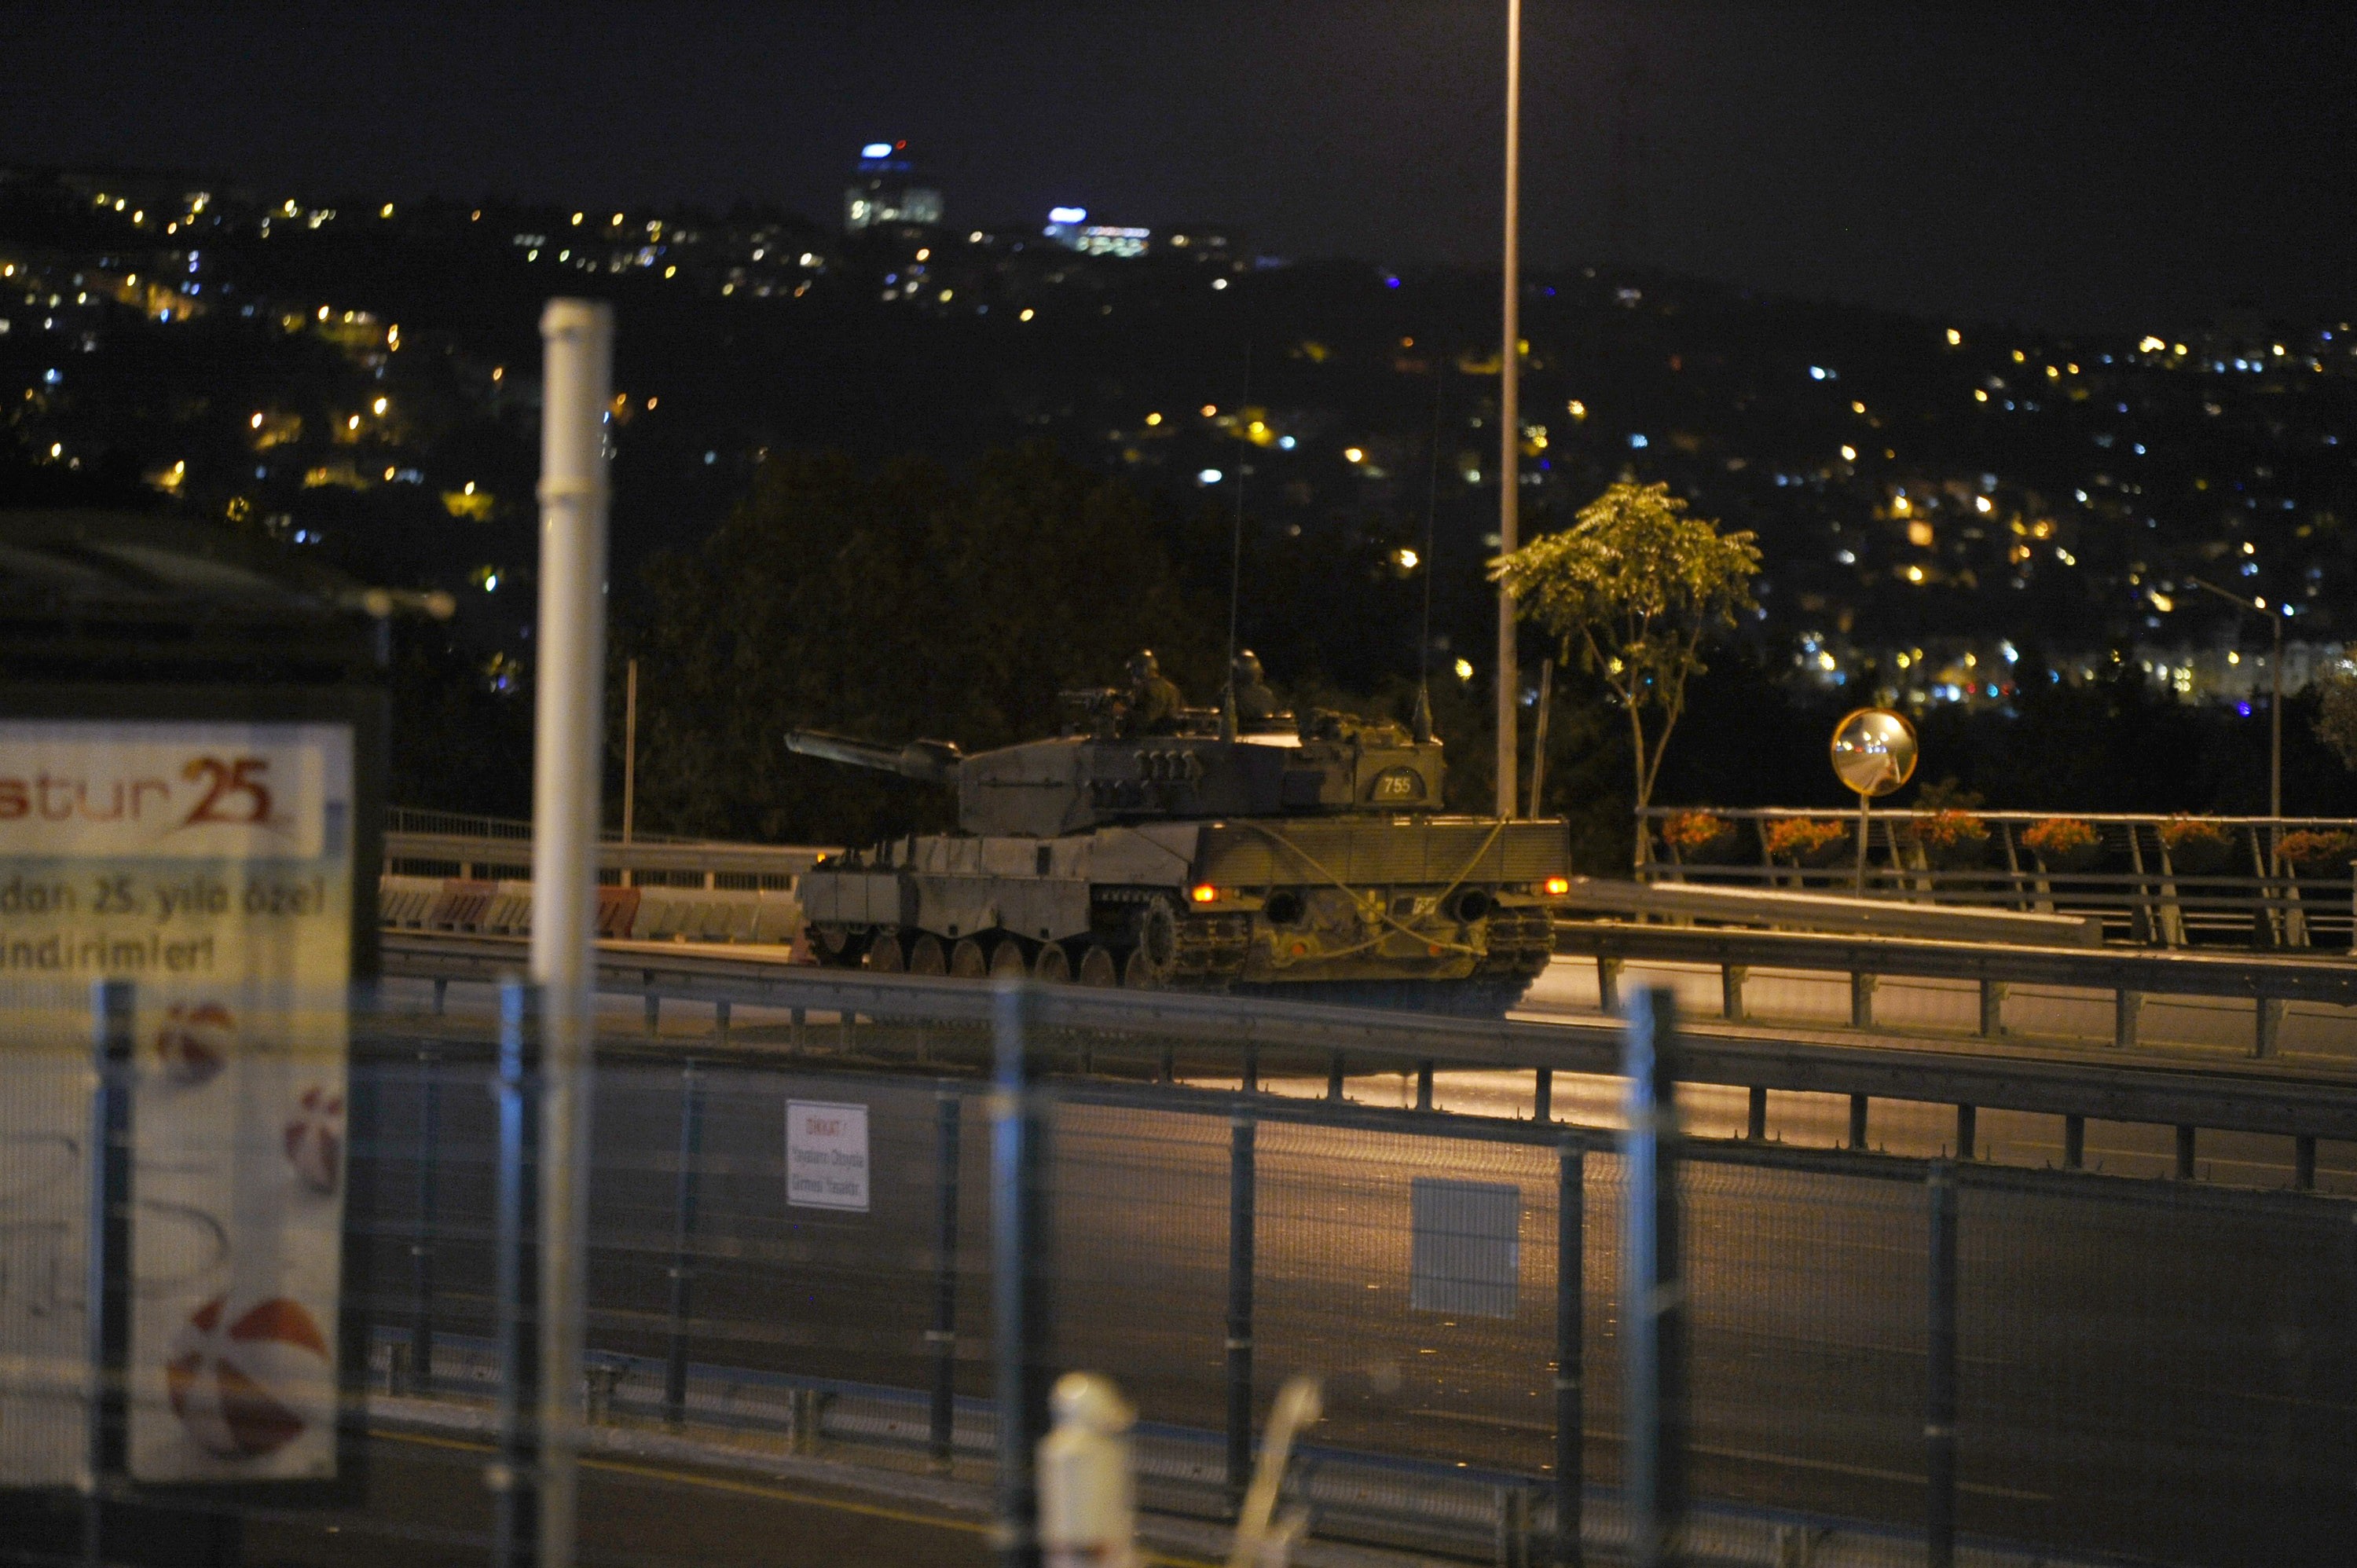 3	Two tanks and armored personnel carriers proceeded to seize the bridges. Four tanks, two armored personnel carriers and two armored combat vehicles were directed to Sabiha Gökçen Airport; four armored personnel carriers to the 1st Army Commandership; four armored personnel carriers to Acıbadem Telekom; and eight tanks, two armored personnel carriers and two armored combat vehicles to the Üsküdar riot police base.